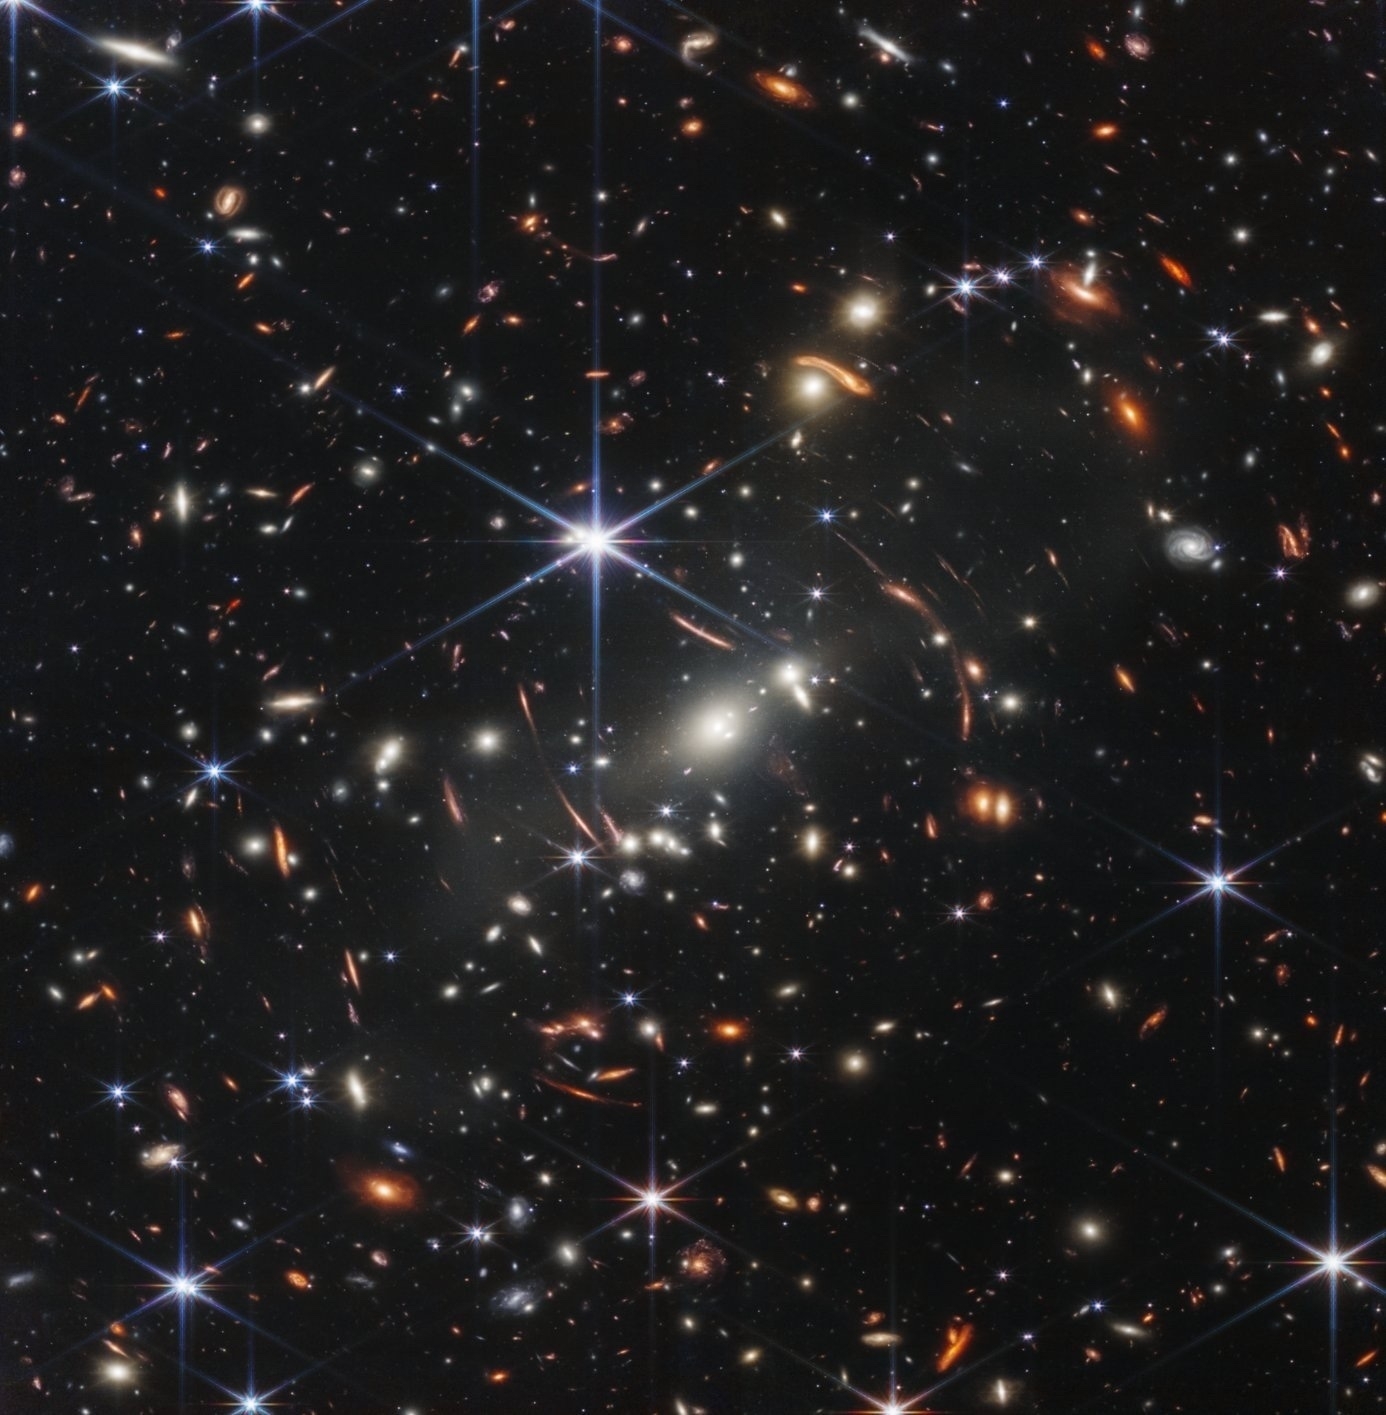 Image of distance galaxies from the James Webb space telescope